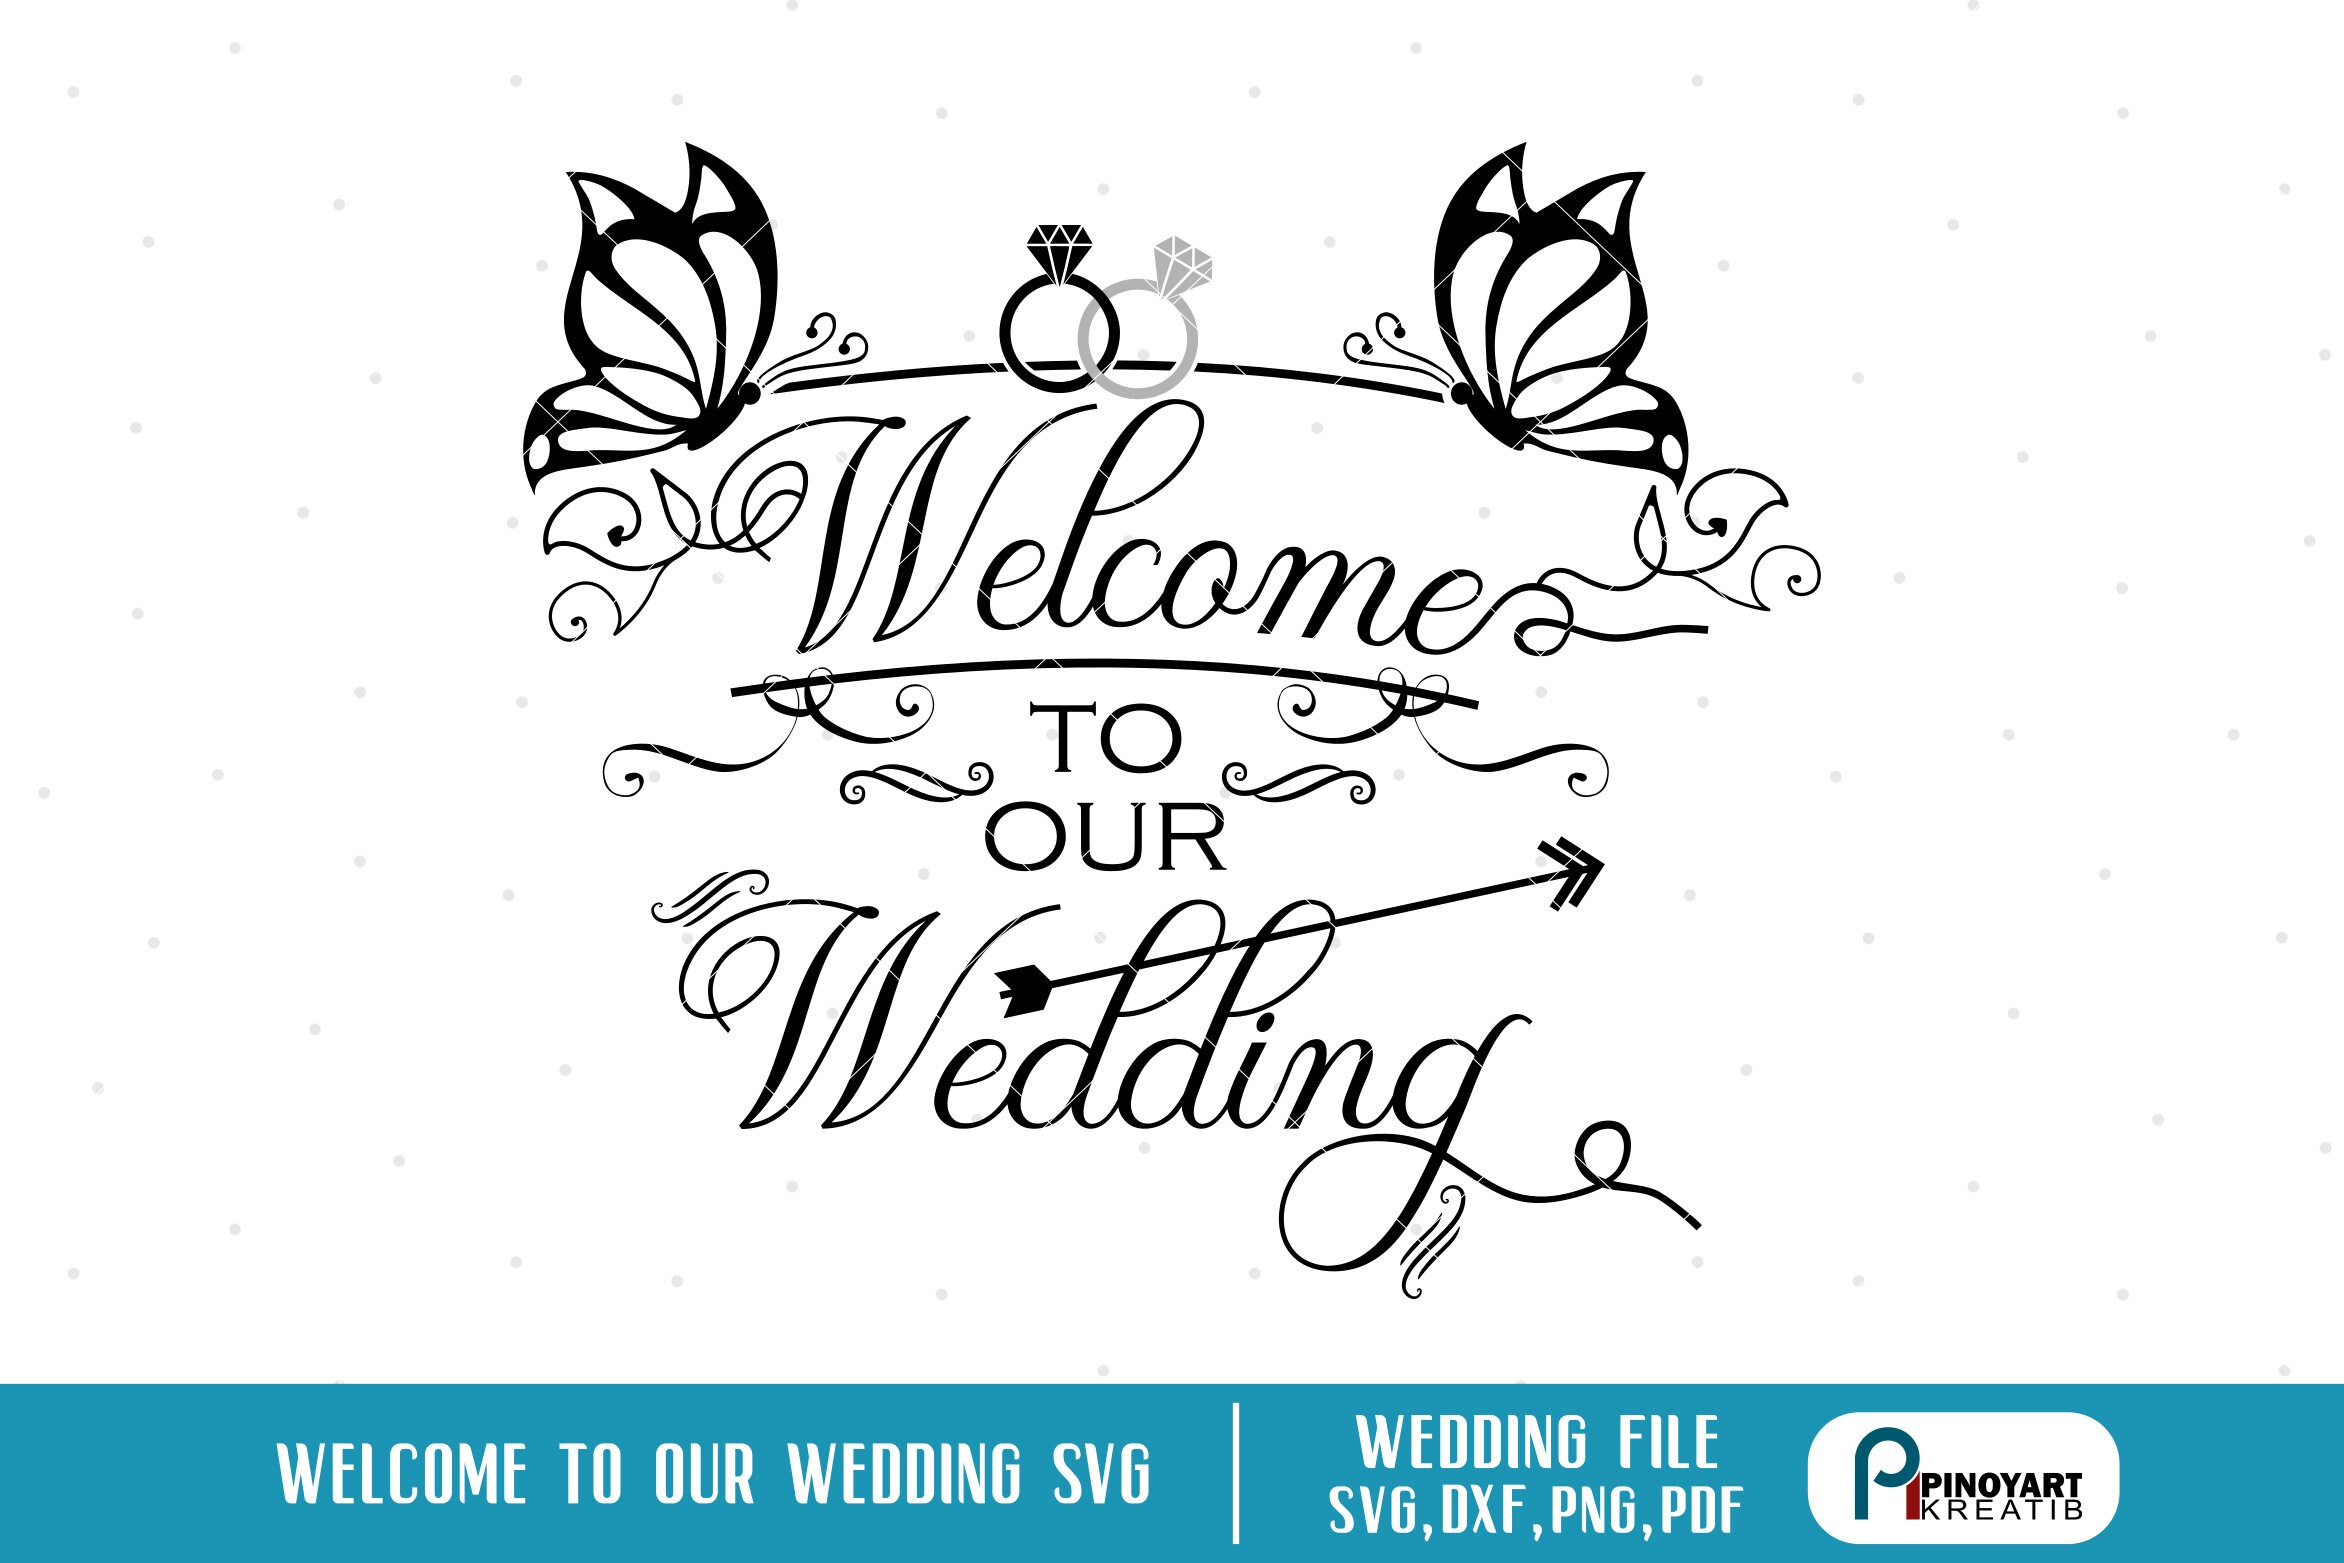 Download welcome to our wedding svg wedding clip art wedding svg | Etsy